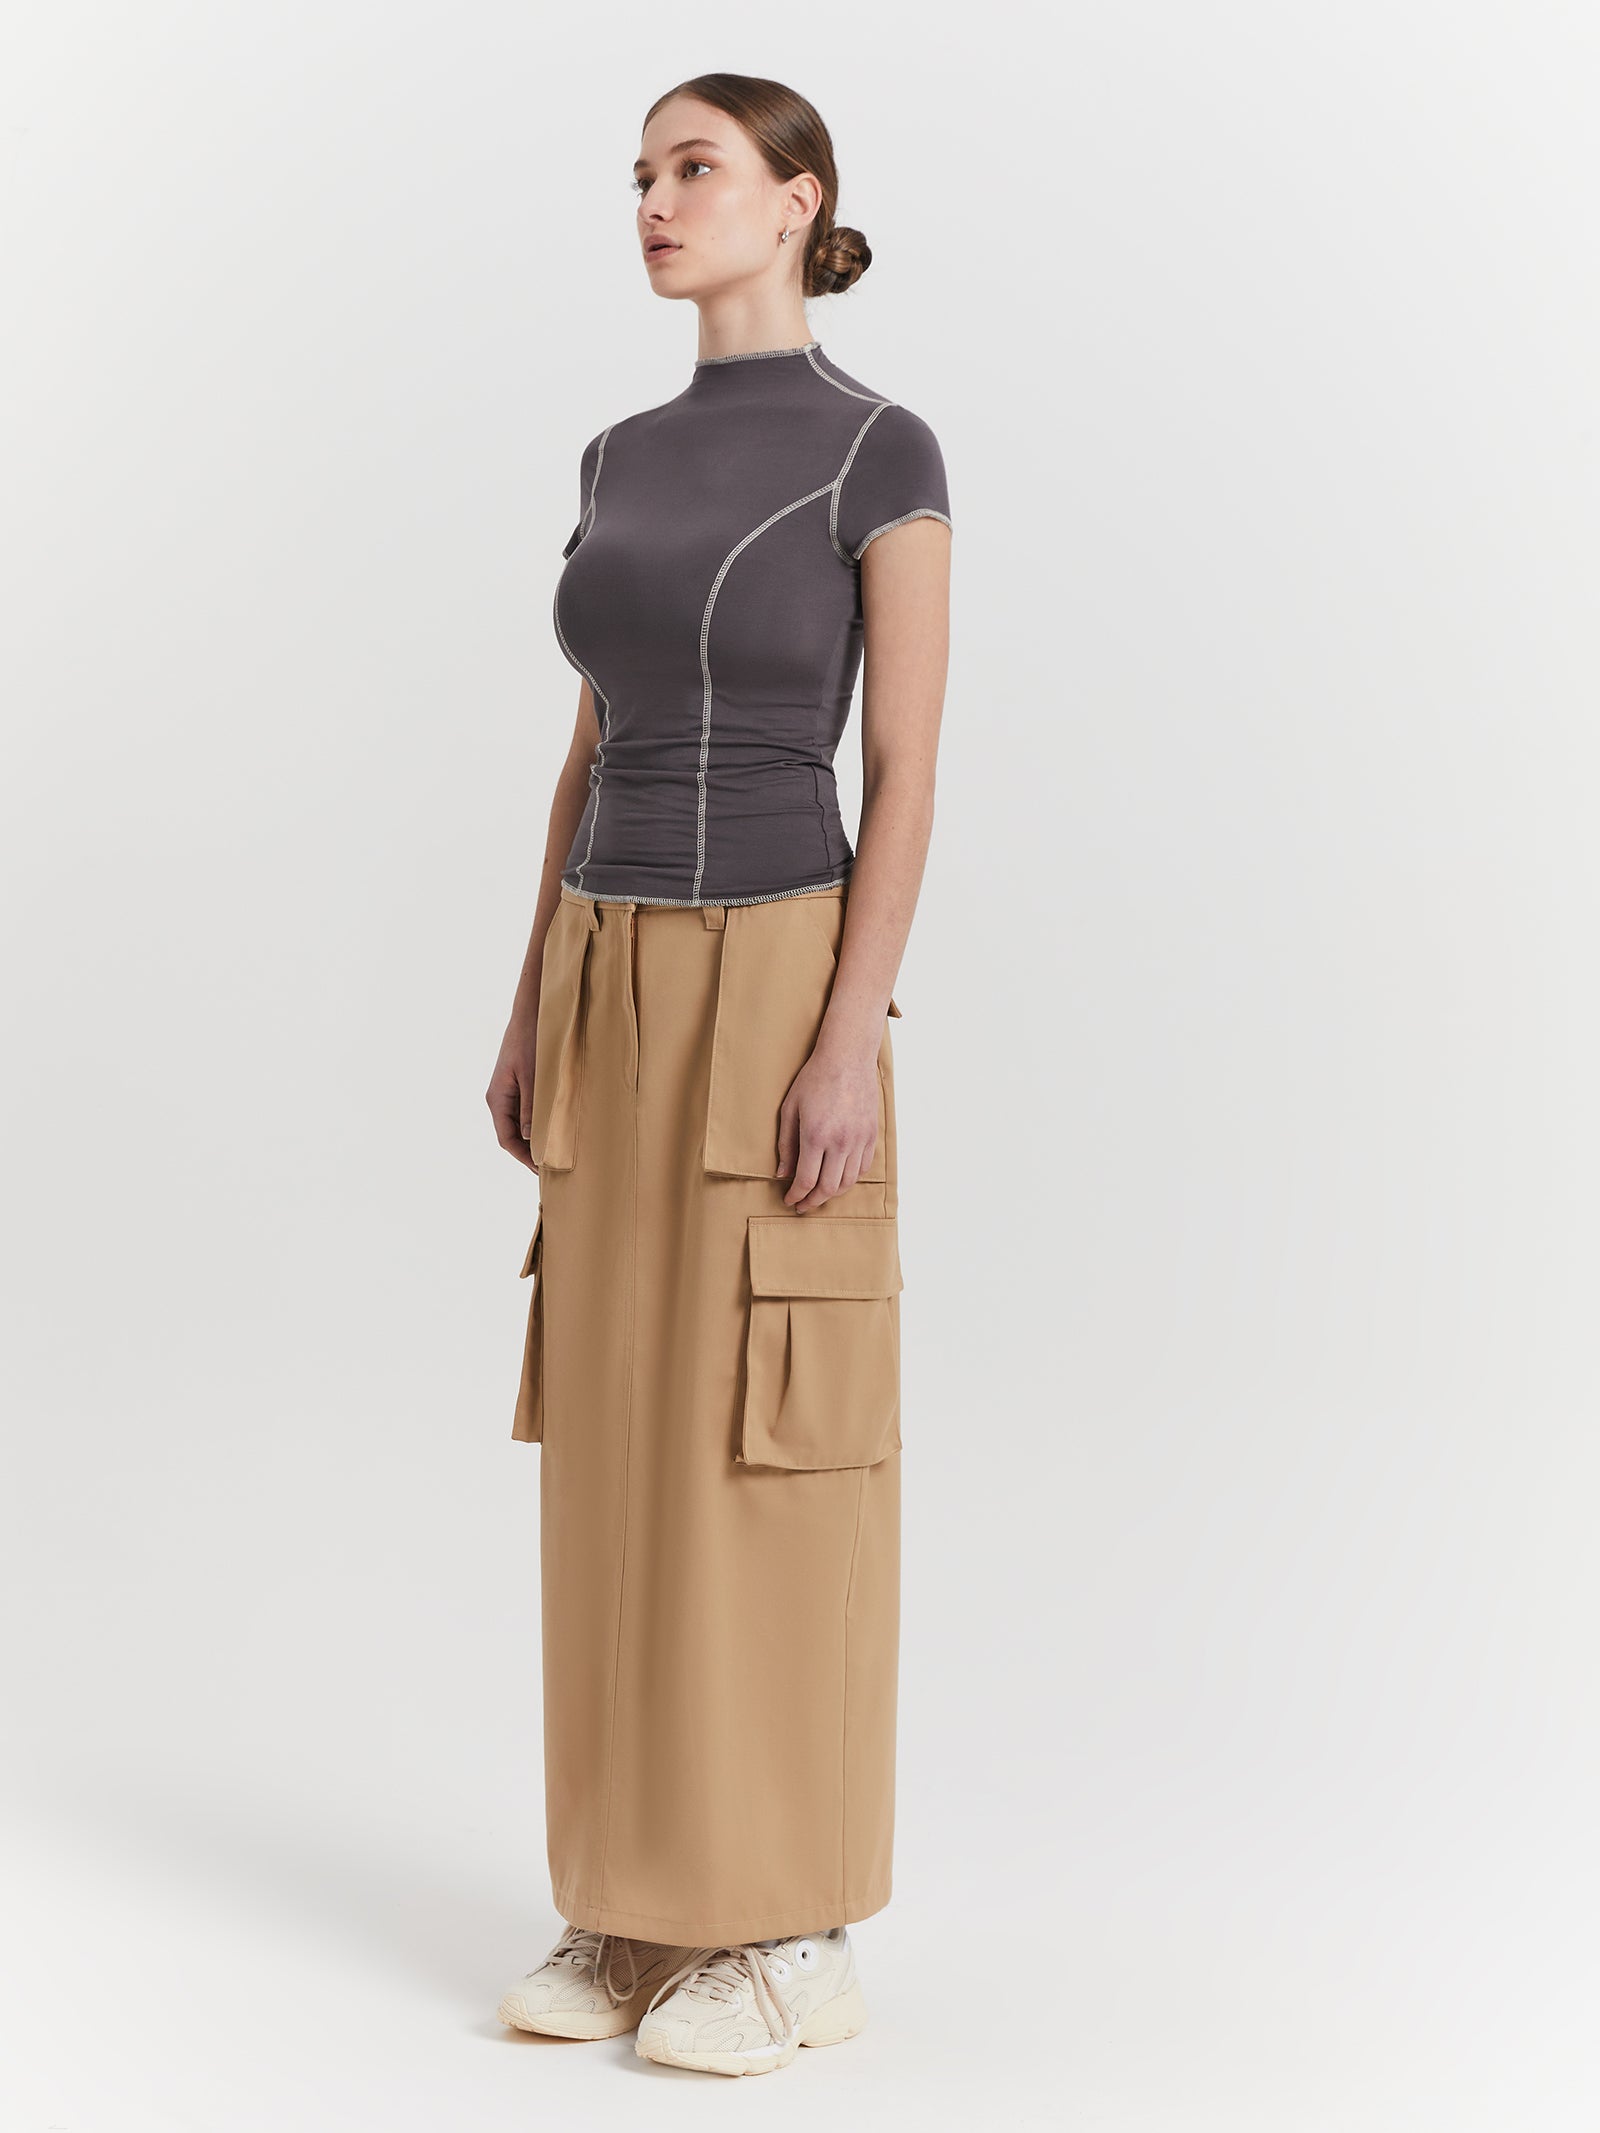 Calle Utility Skirt in Parchment